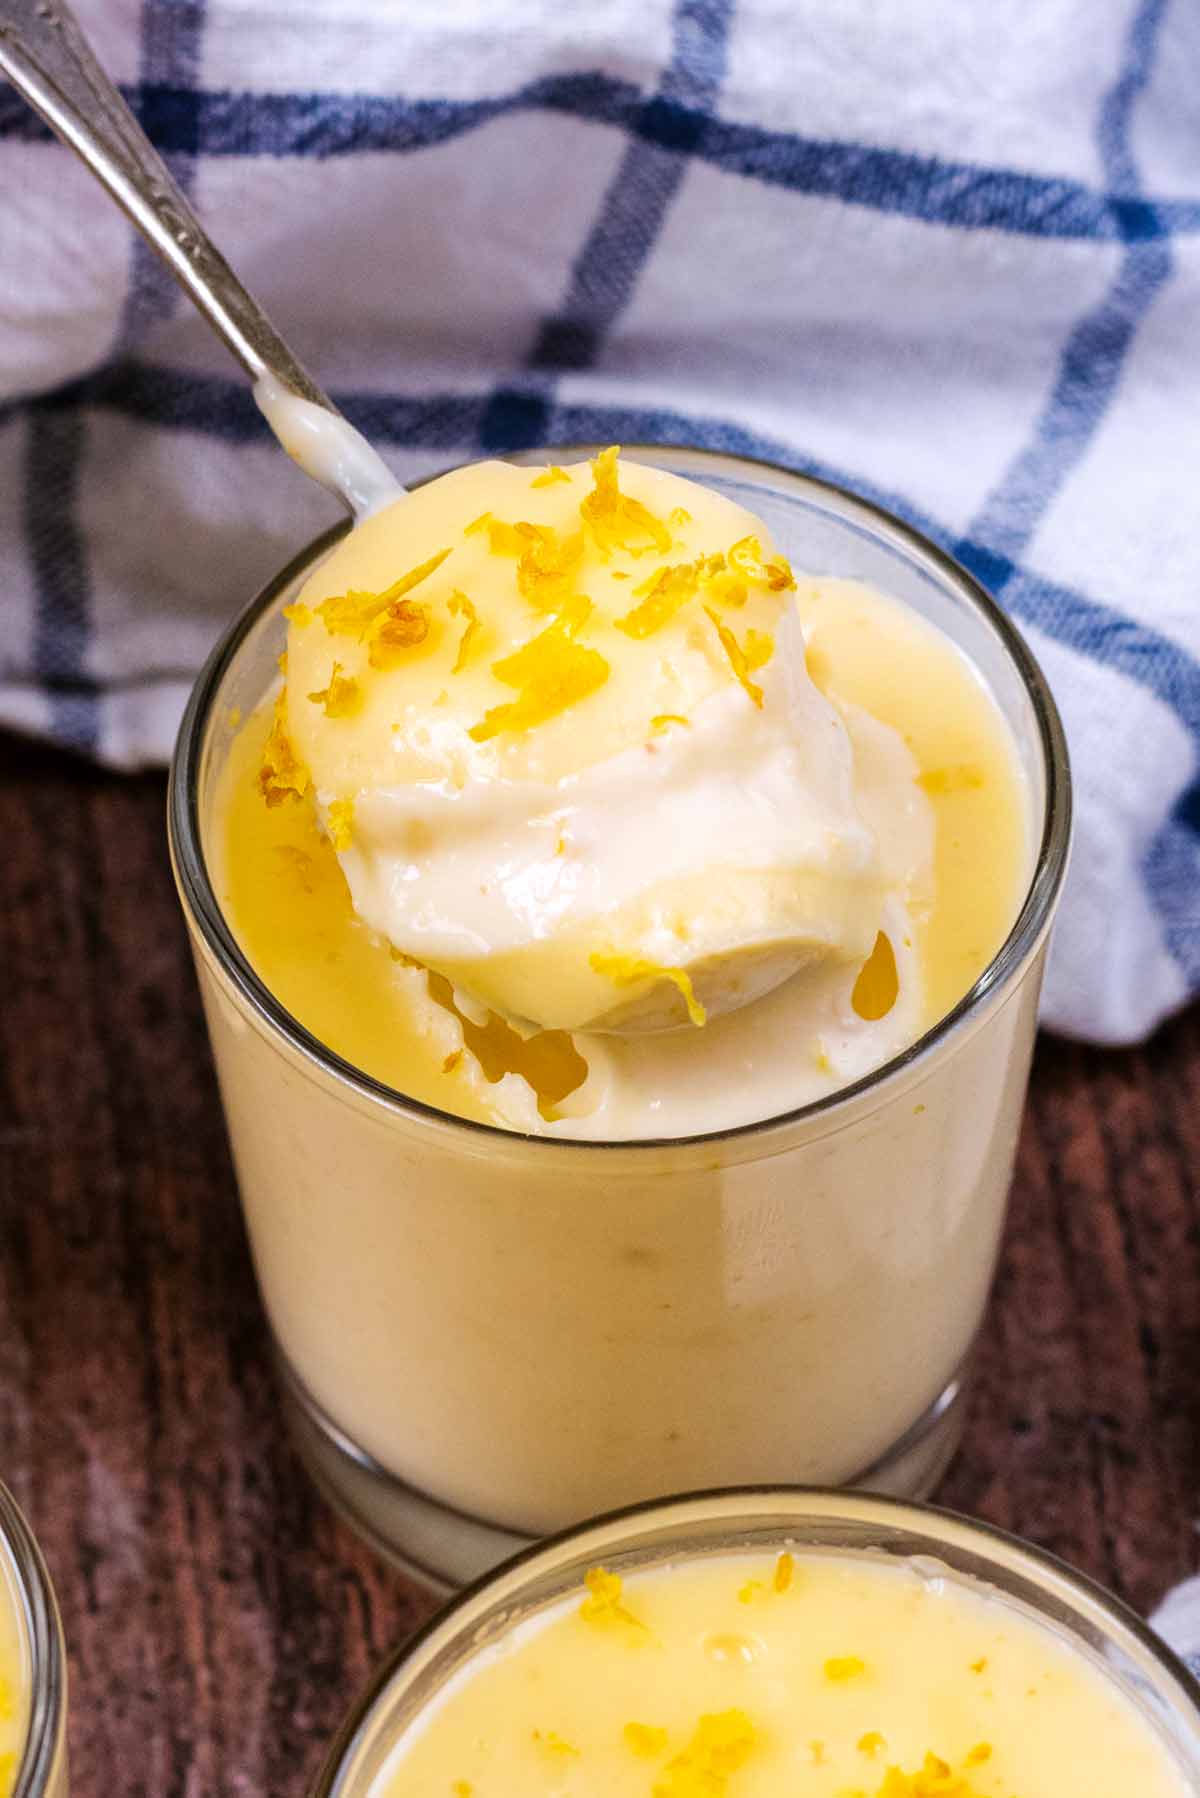 A spoon lifting some lemon posset out of a serving glass.